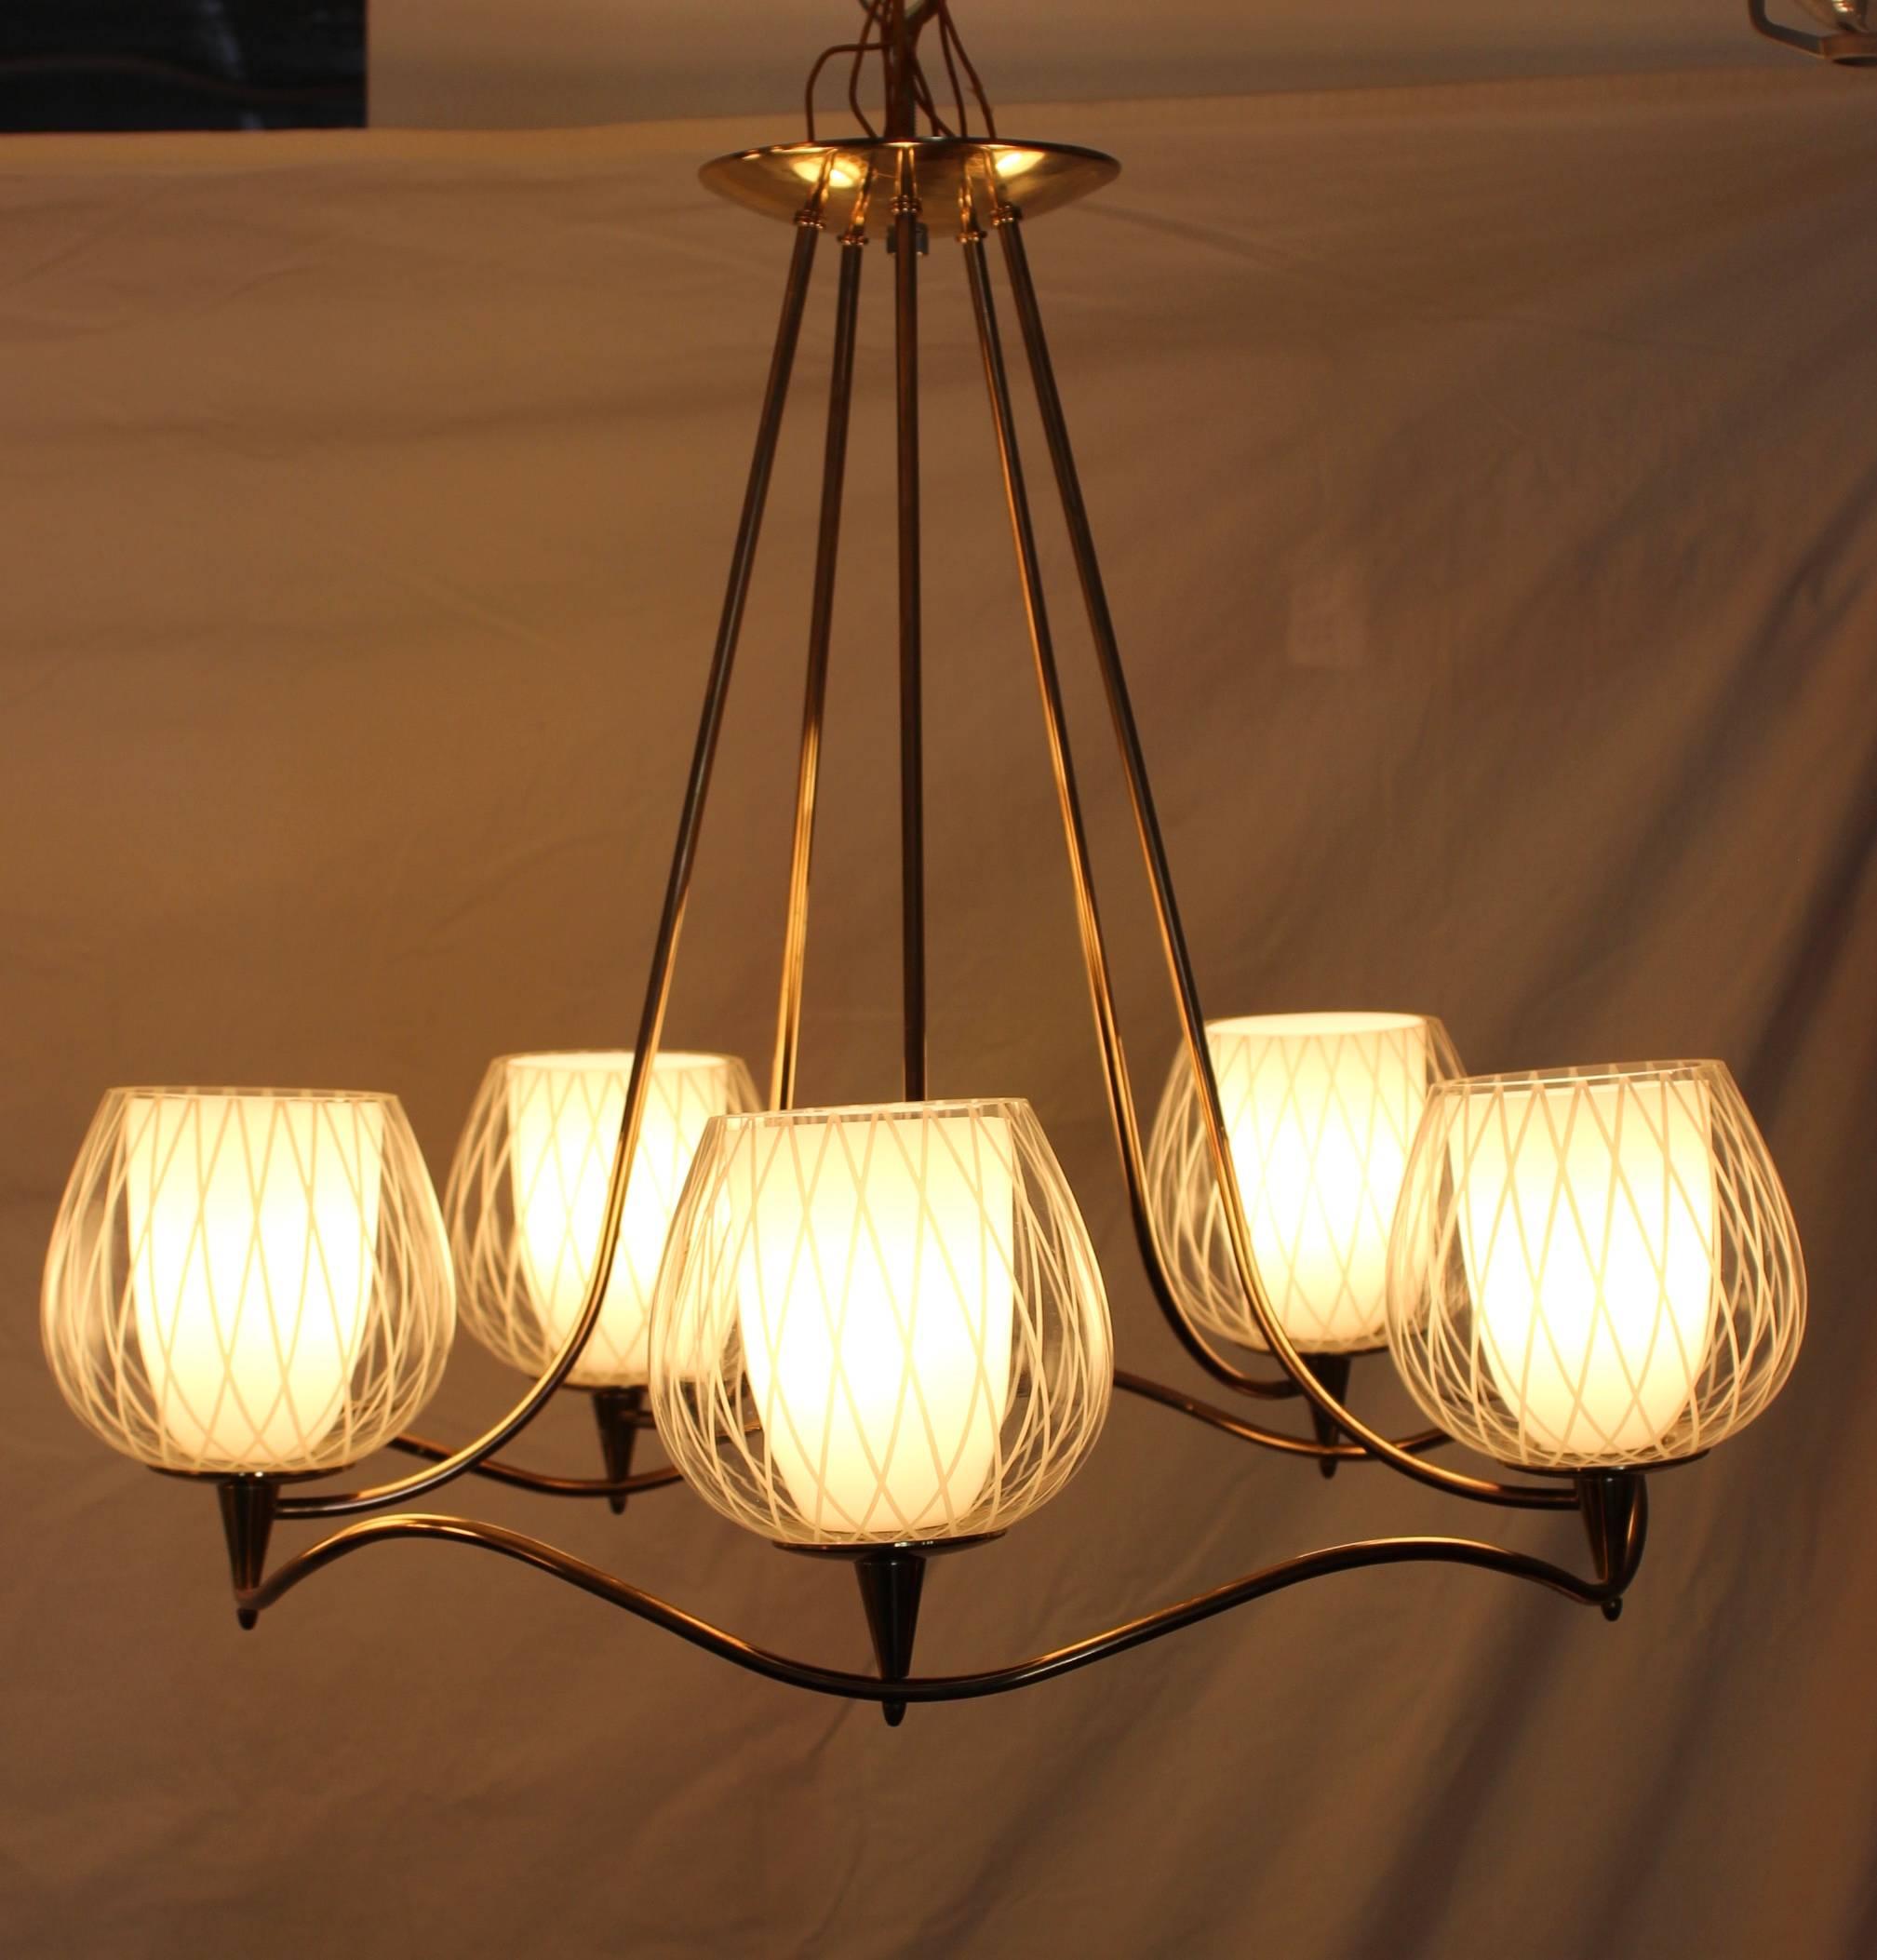 1950s Lightolier brass chandelier with original double case glass, the inner shade is milk glass the outer shade is etched glass.